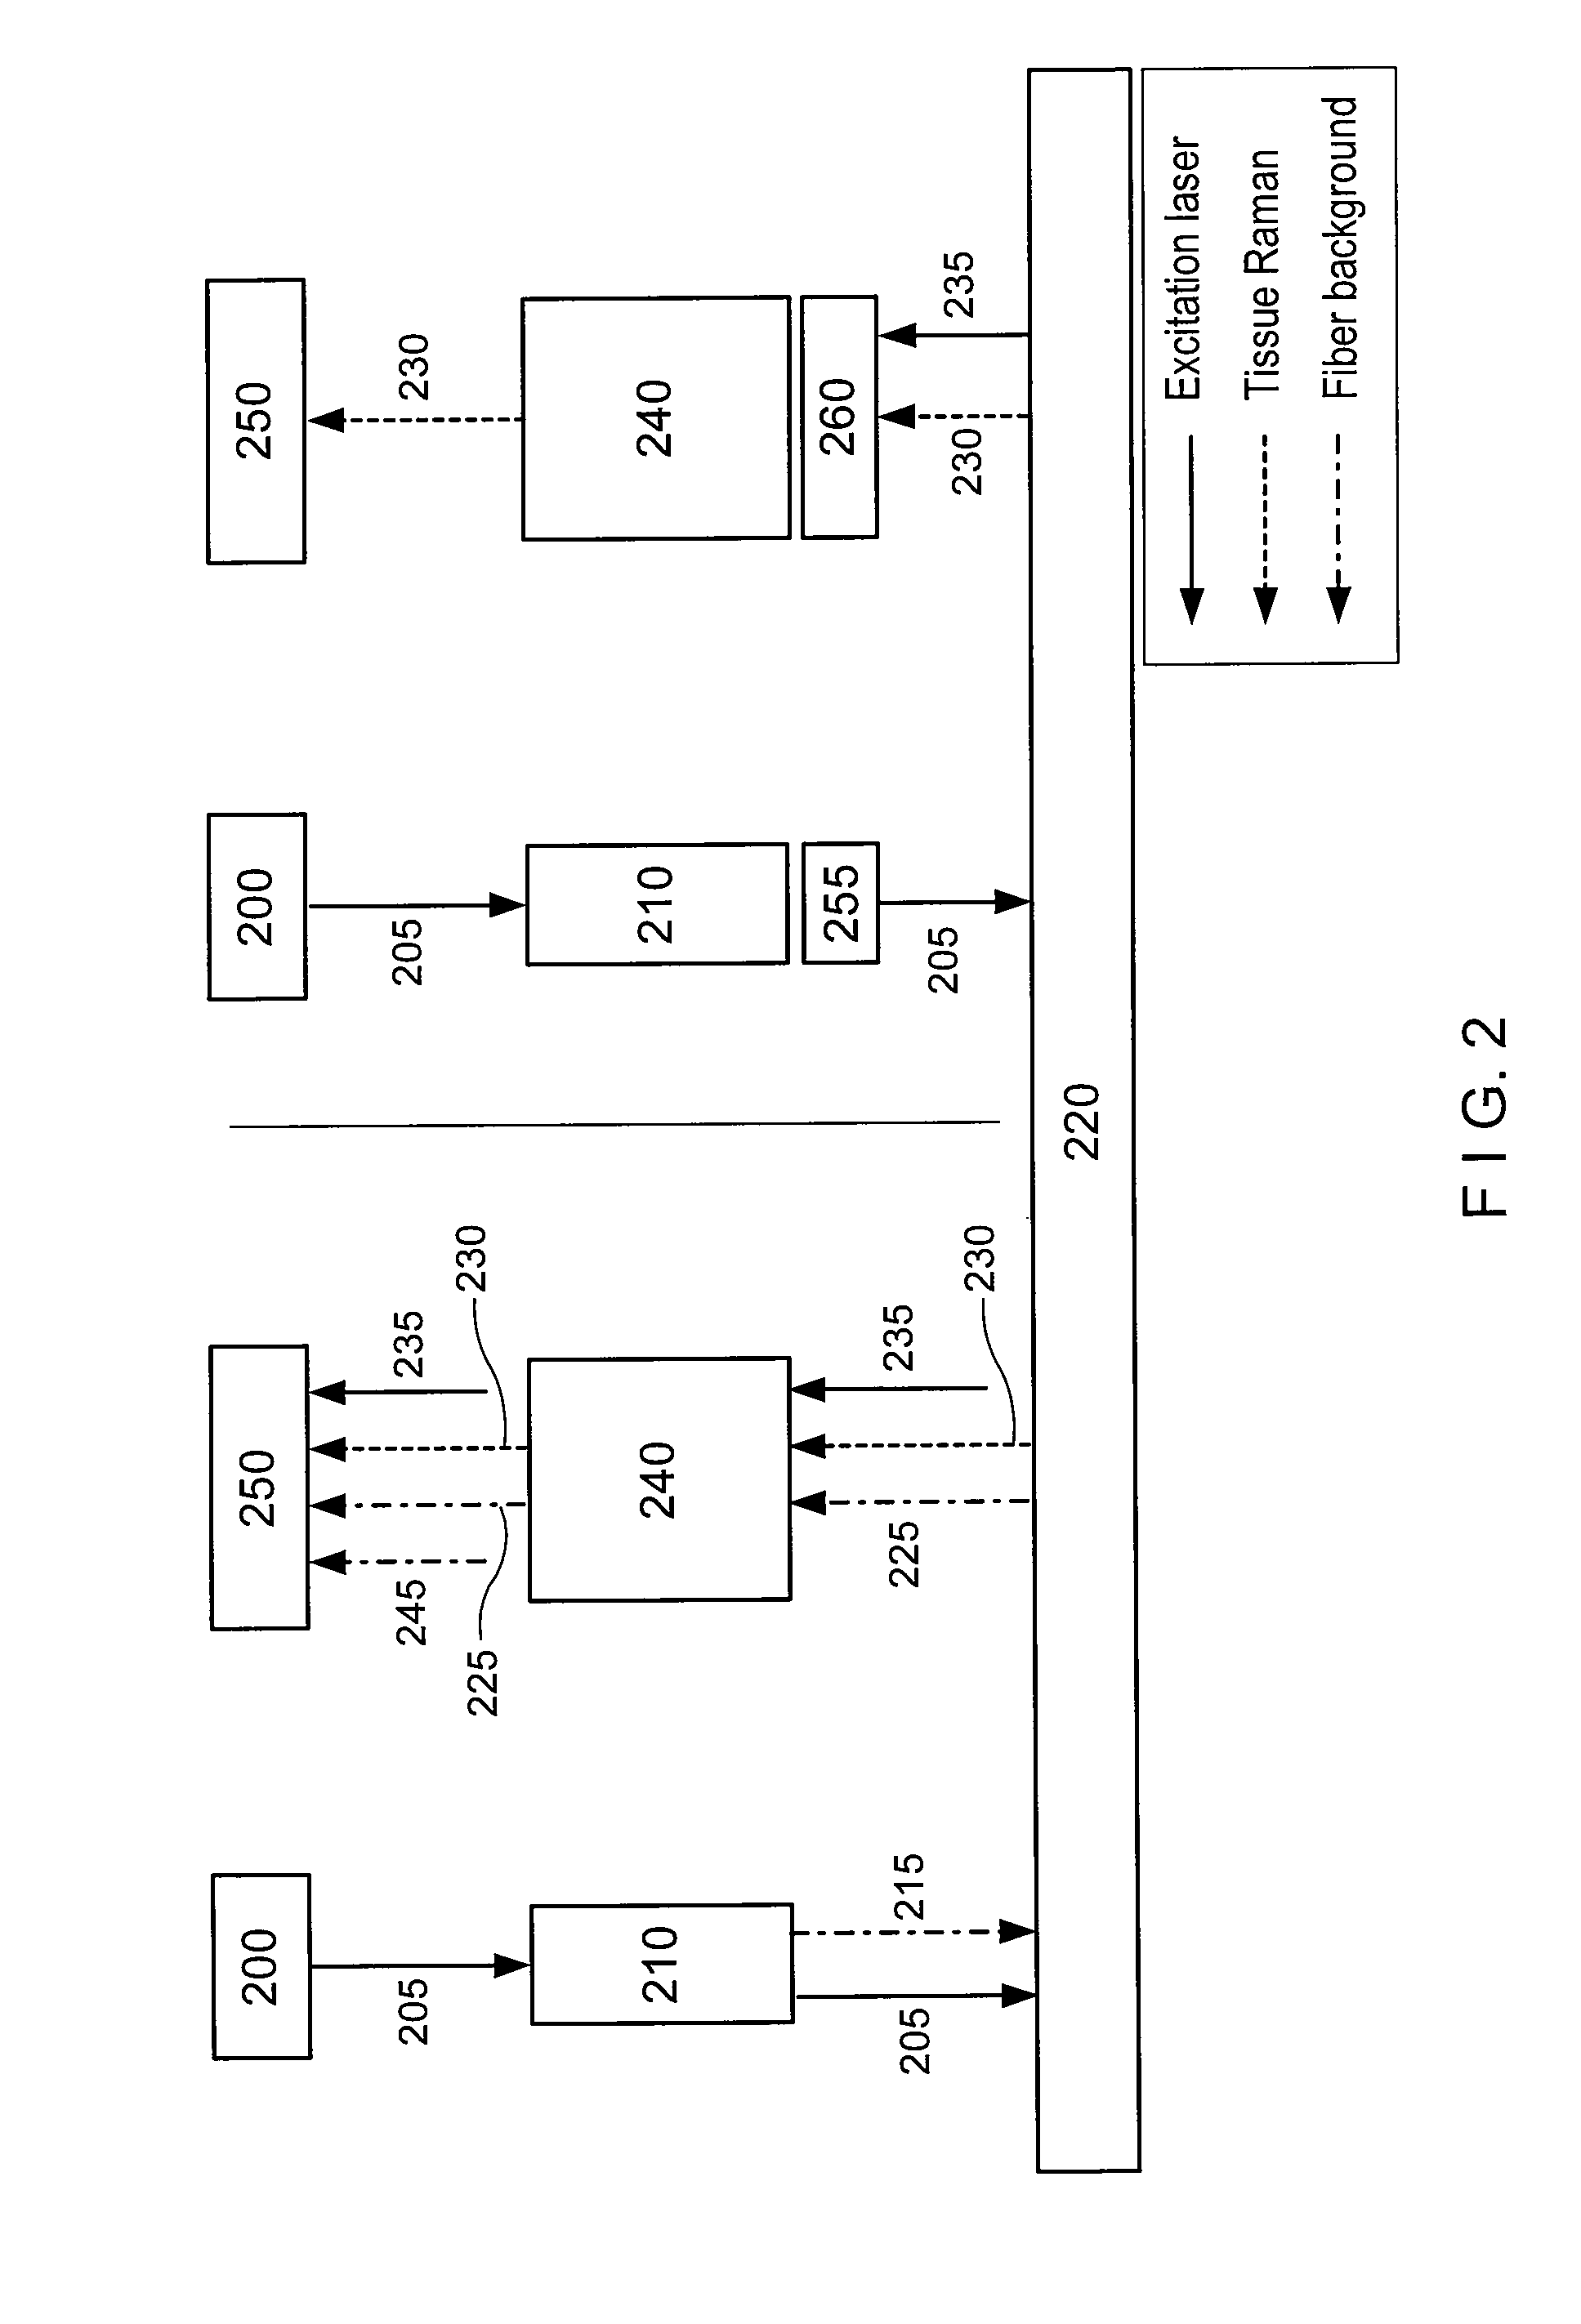 Systems and methods for receiving and/or analyzing information associated with electro-magnetic radiation